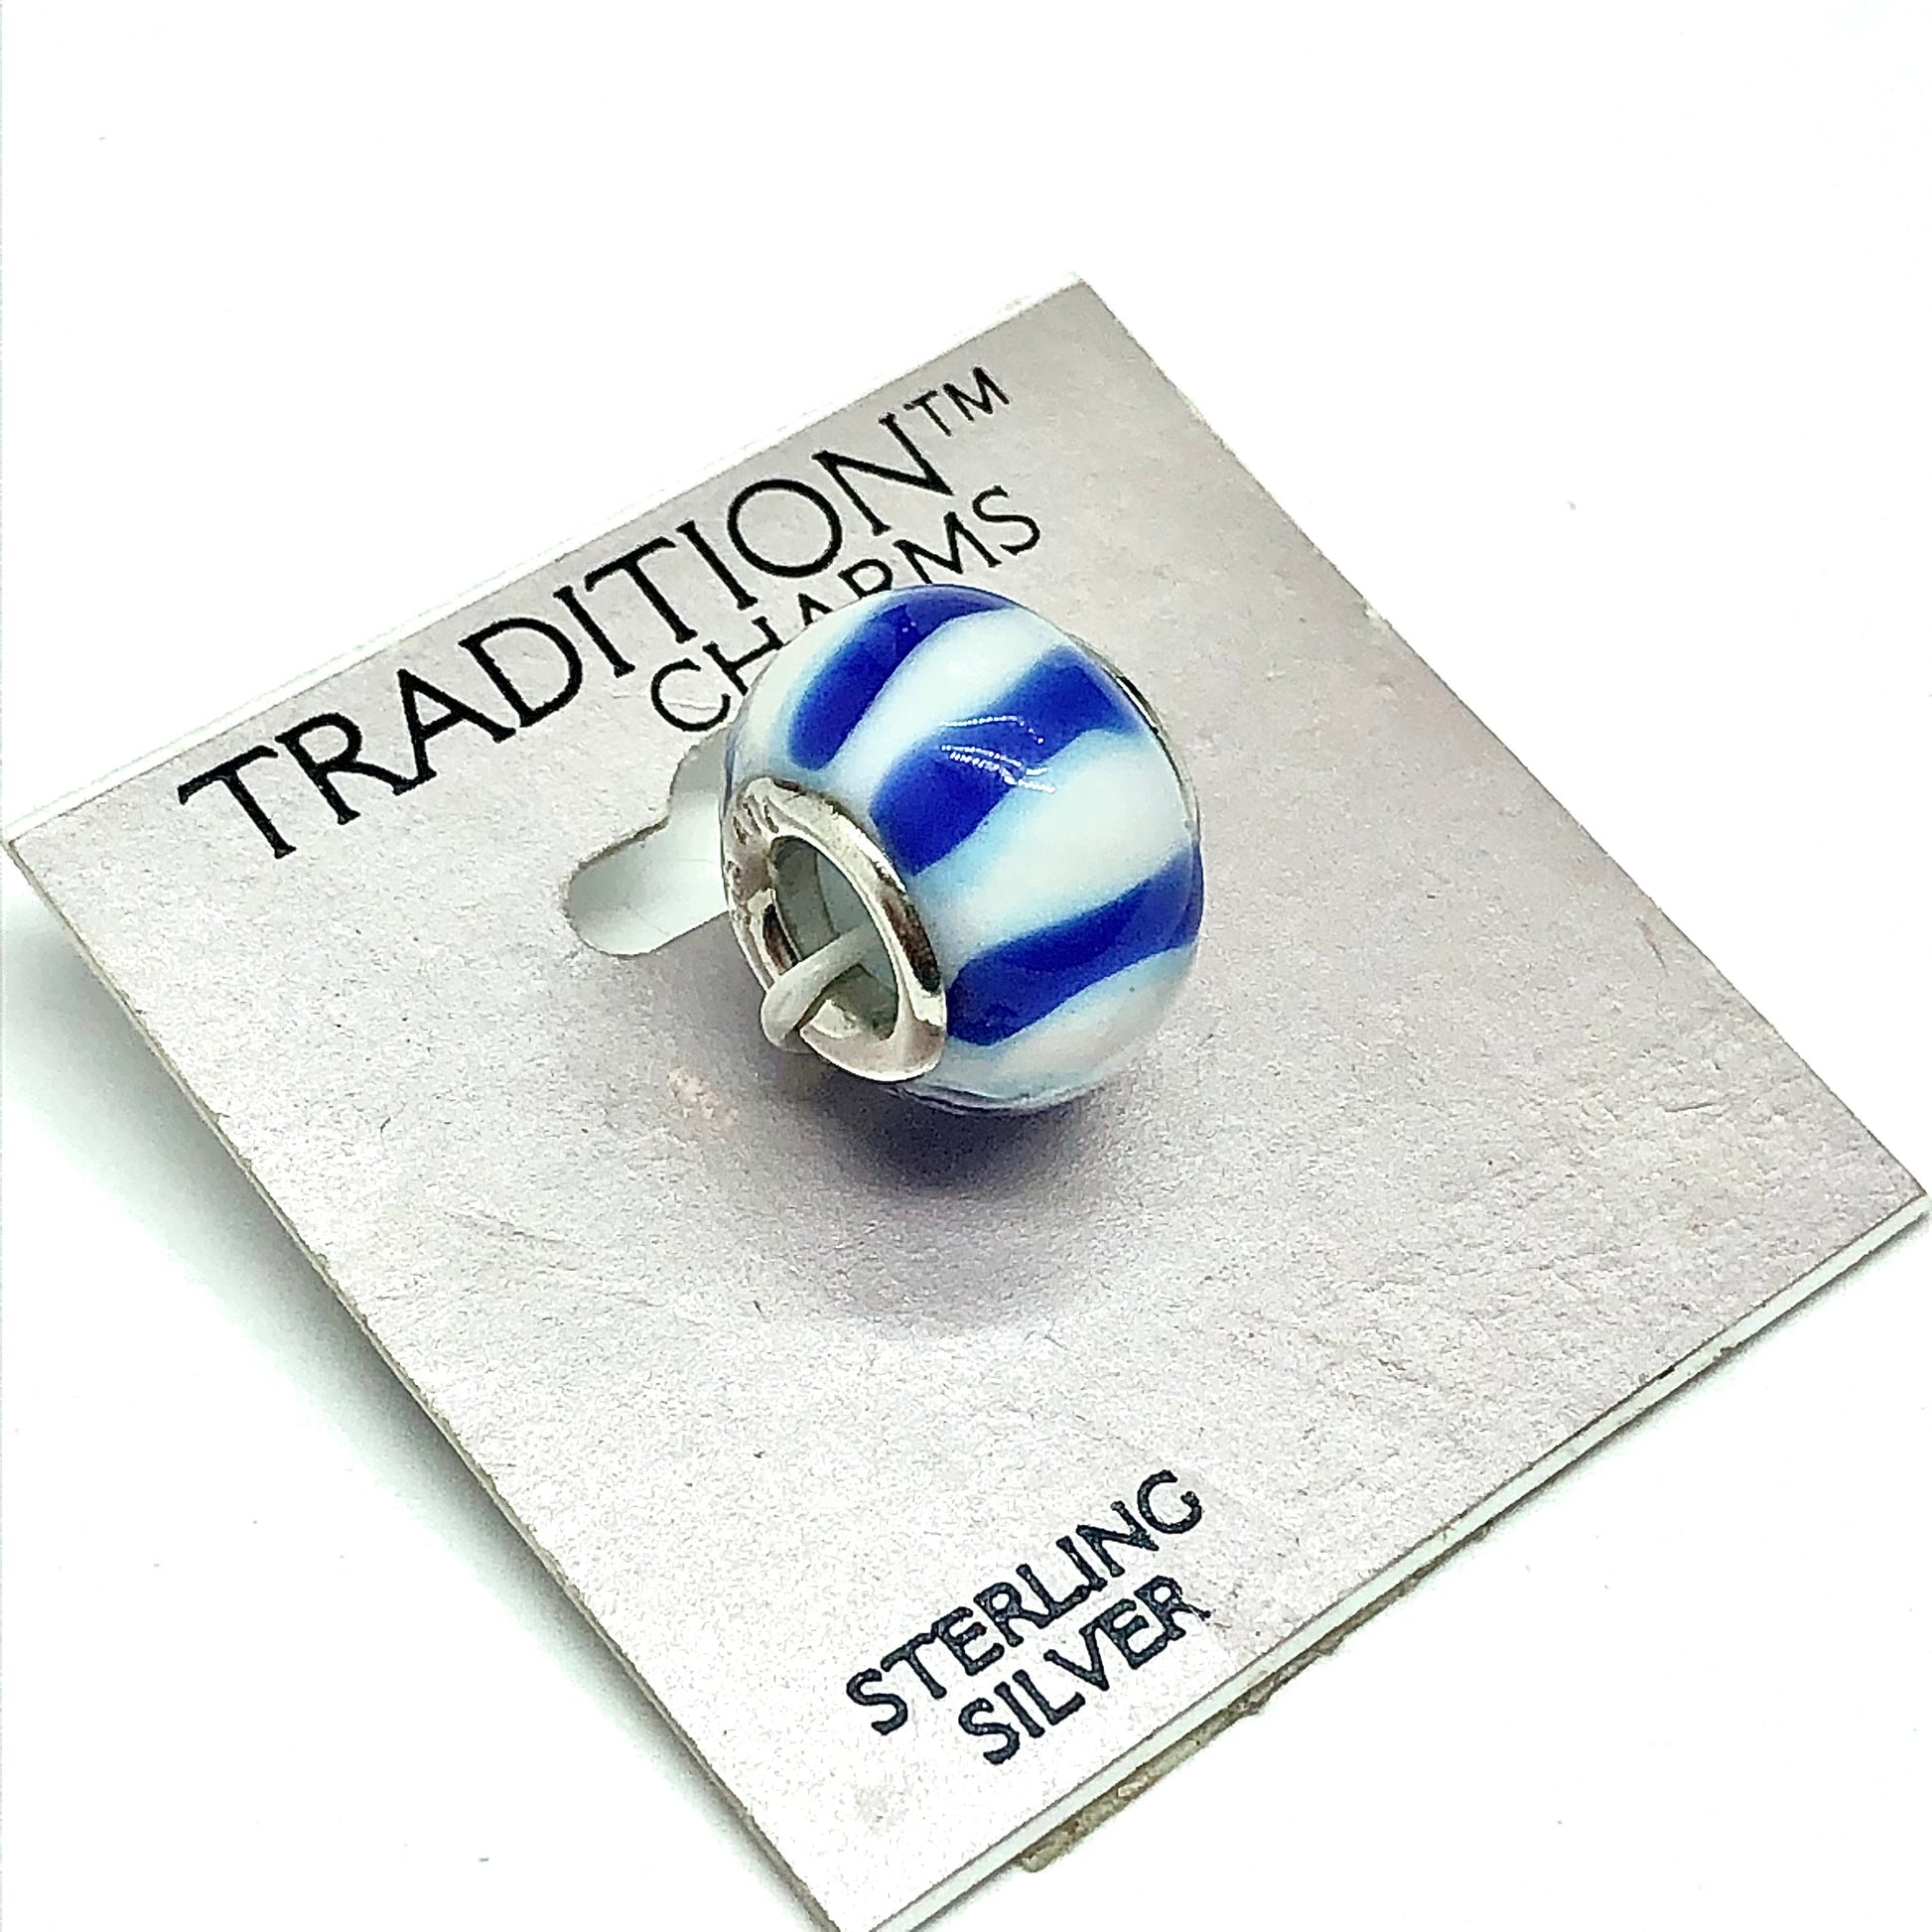 Affordable Charms for Bracelets & Necklaces Blue White Sailor Stripe Design Bead Charm Sterling Silver - Blingschlingers Jewelry